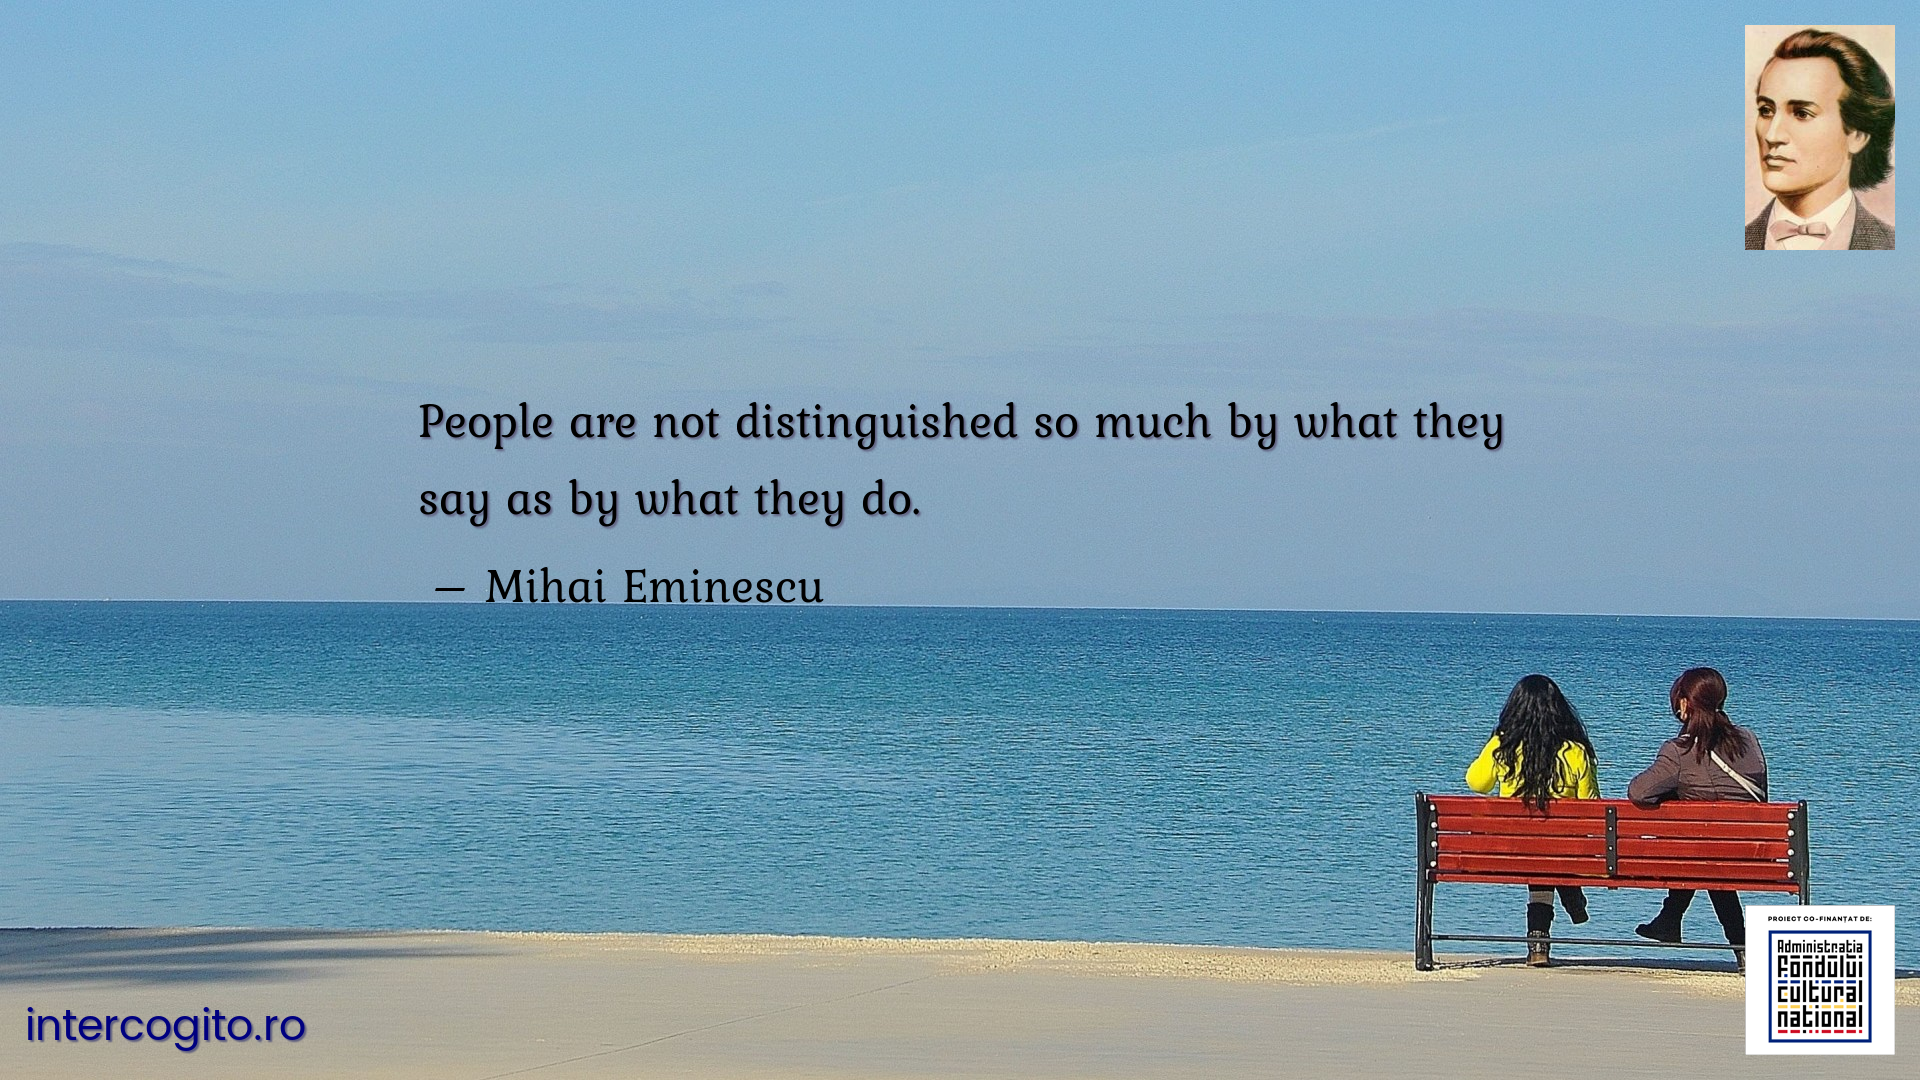 People are not distinguished so much by what they say as by what they do.